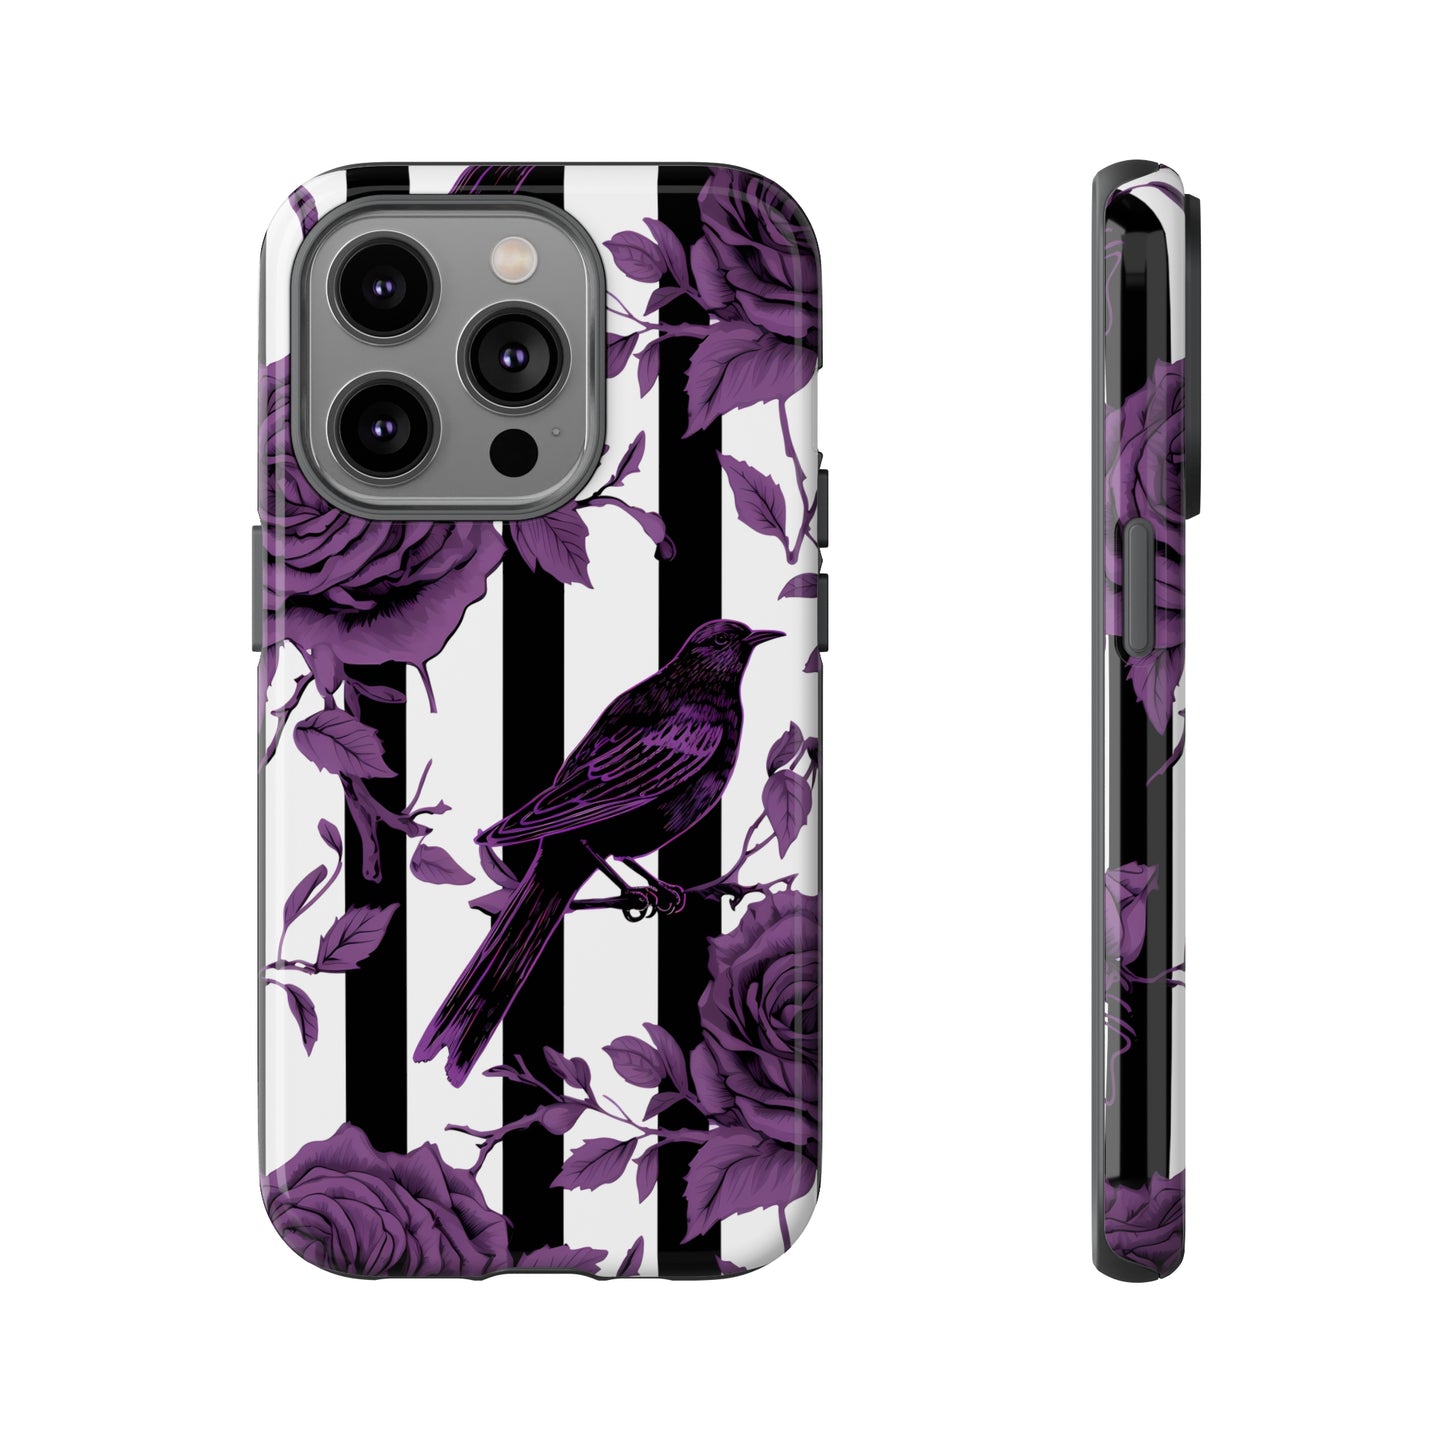 Striped Crows and Roses Tough Cases for iPhone Samsung Google PhonesPhone CaseVTZdesignsiPhone 14 ProGlossyAccessoriescrowsGlossy